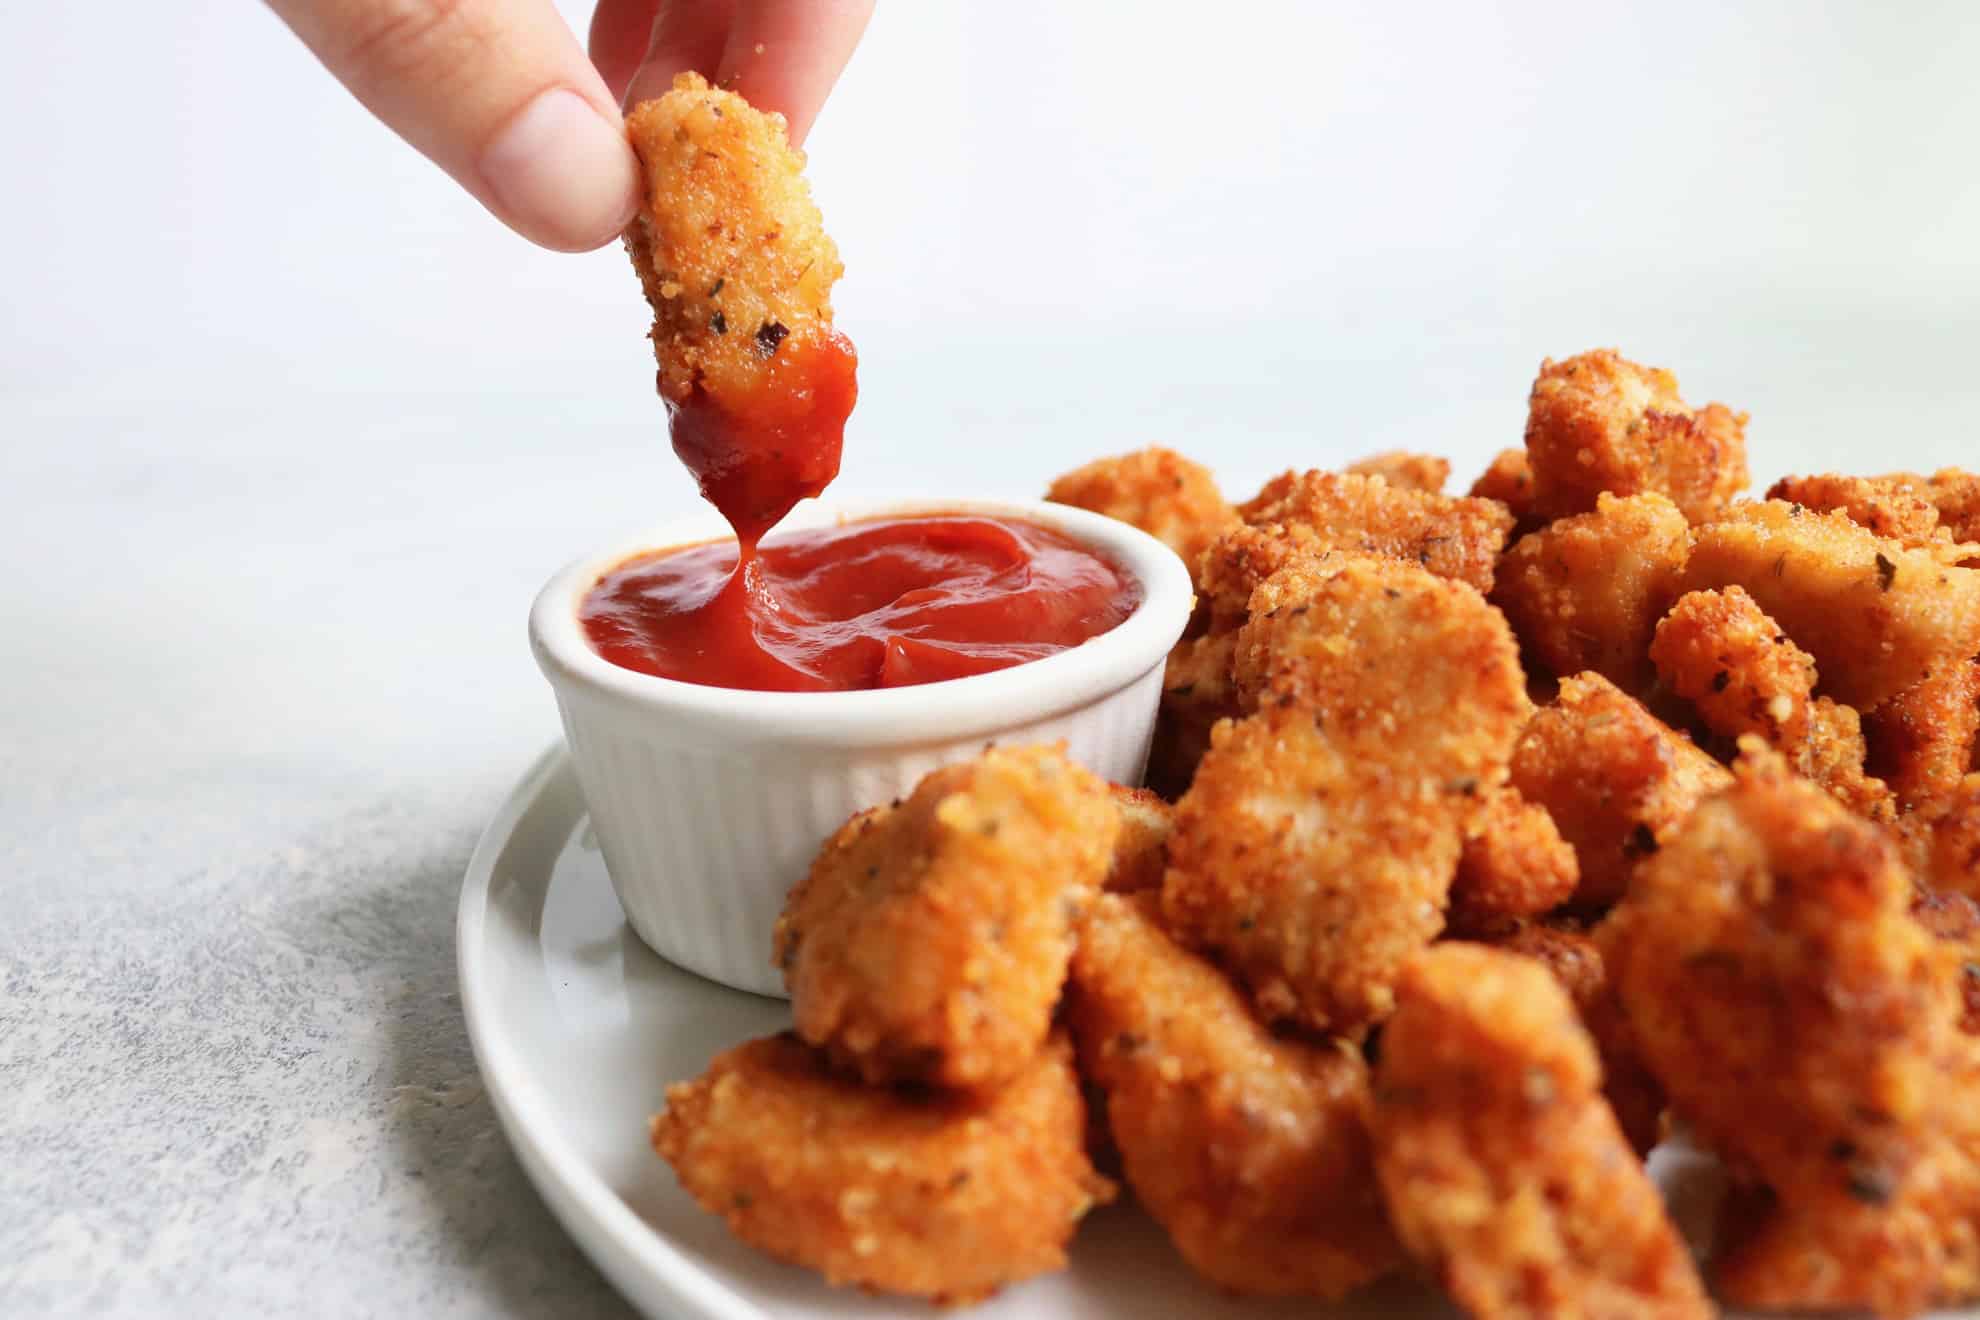 This is a side view of a white plate filled with chicken nuggets. A hand is holding one nugget above the plate and dipping it in a small white bowl of ketchup. The counter and background is white.